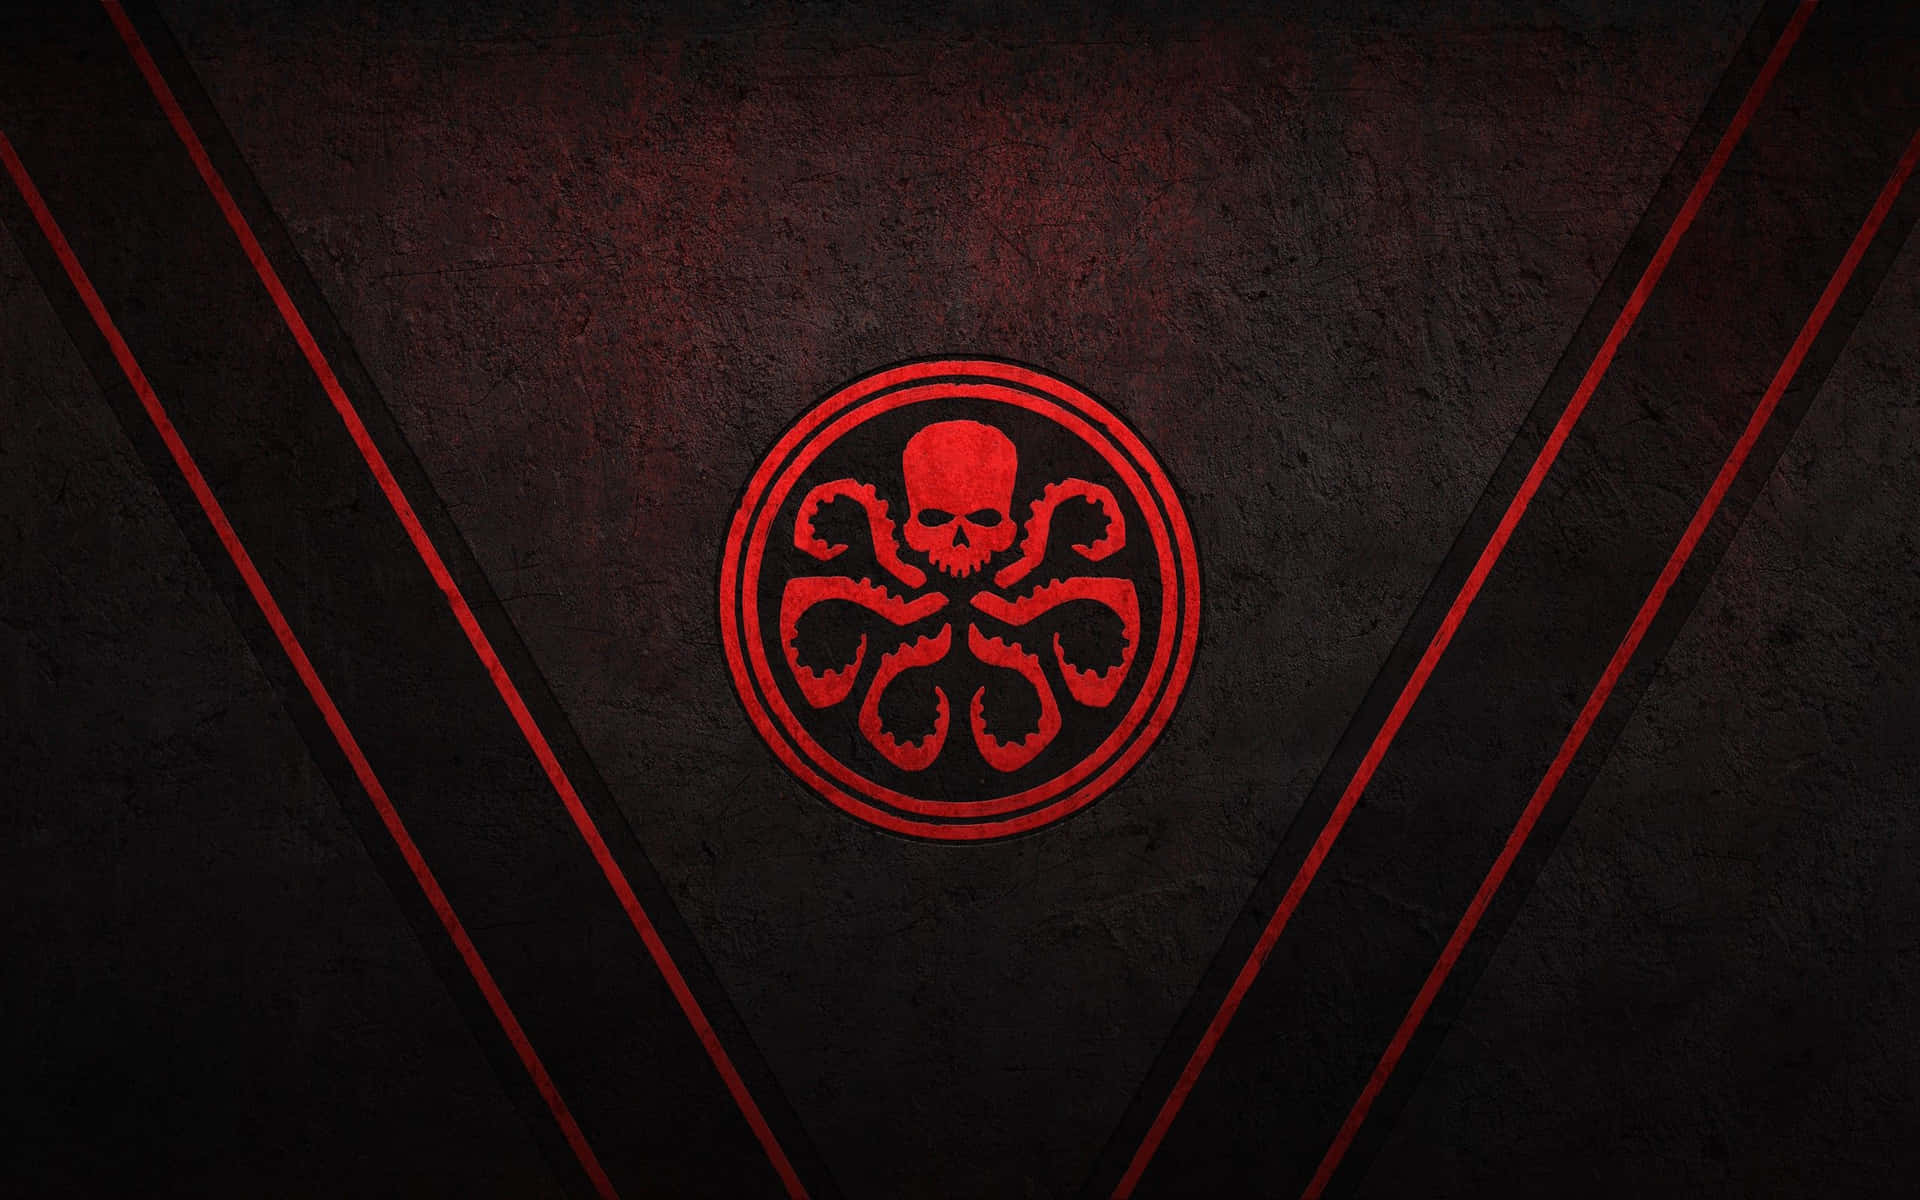 A Red And Black Logo With A Skull On It